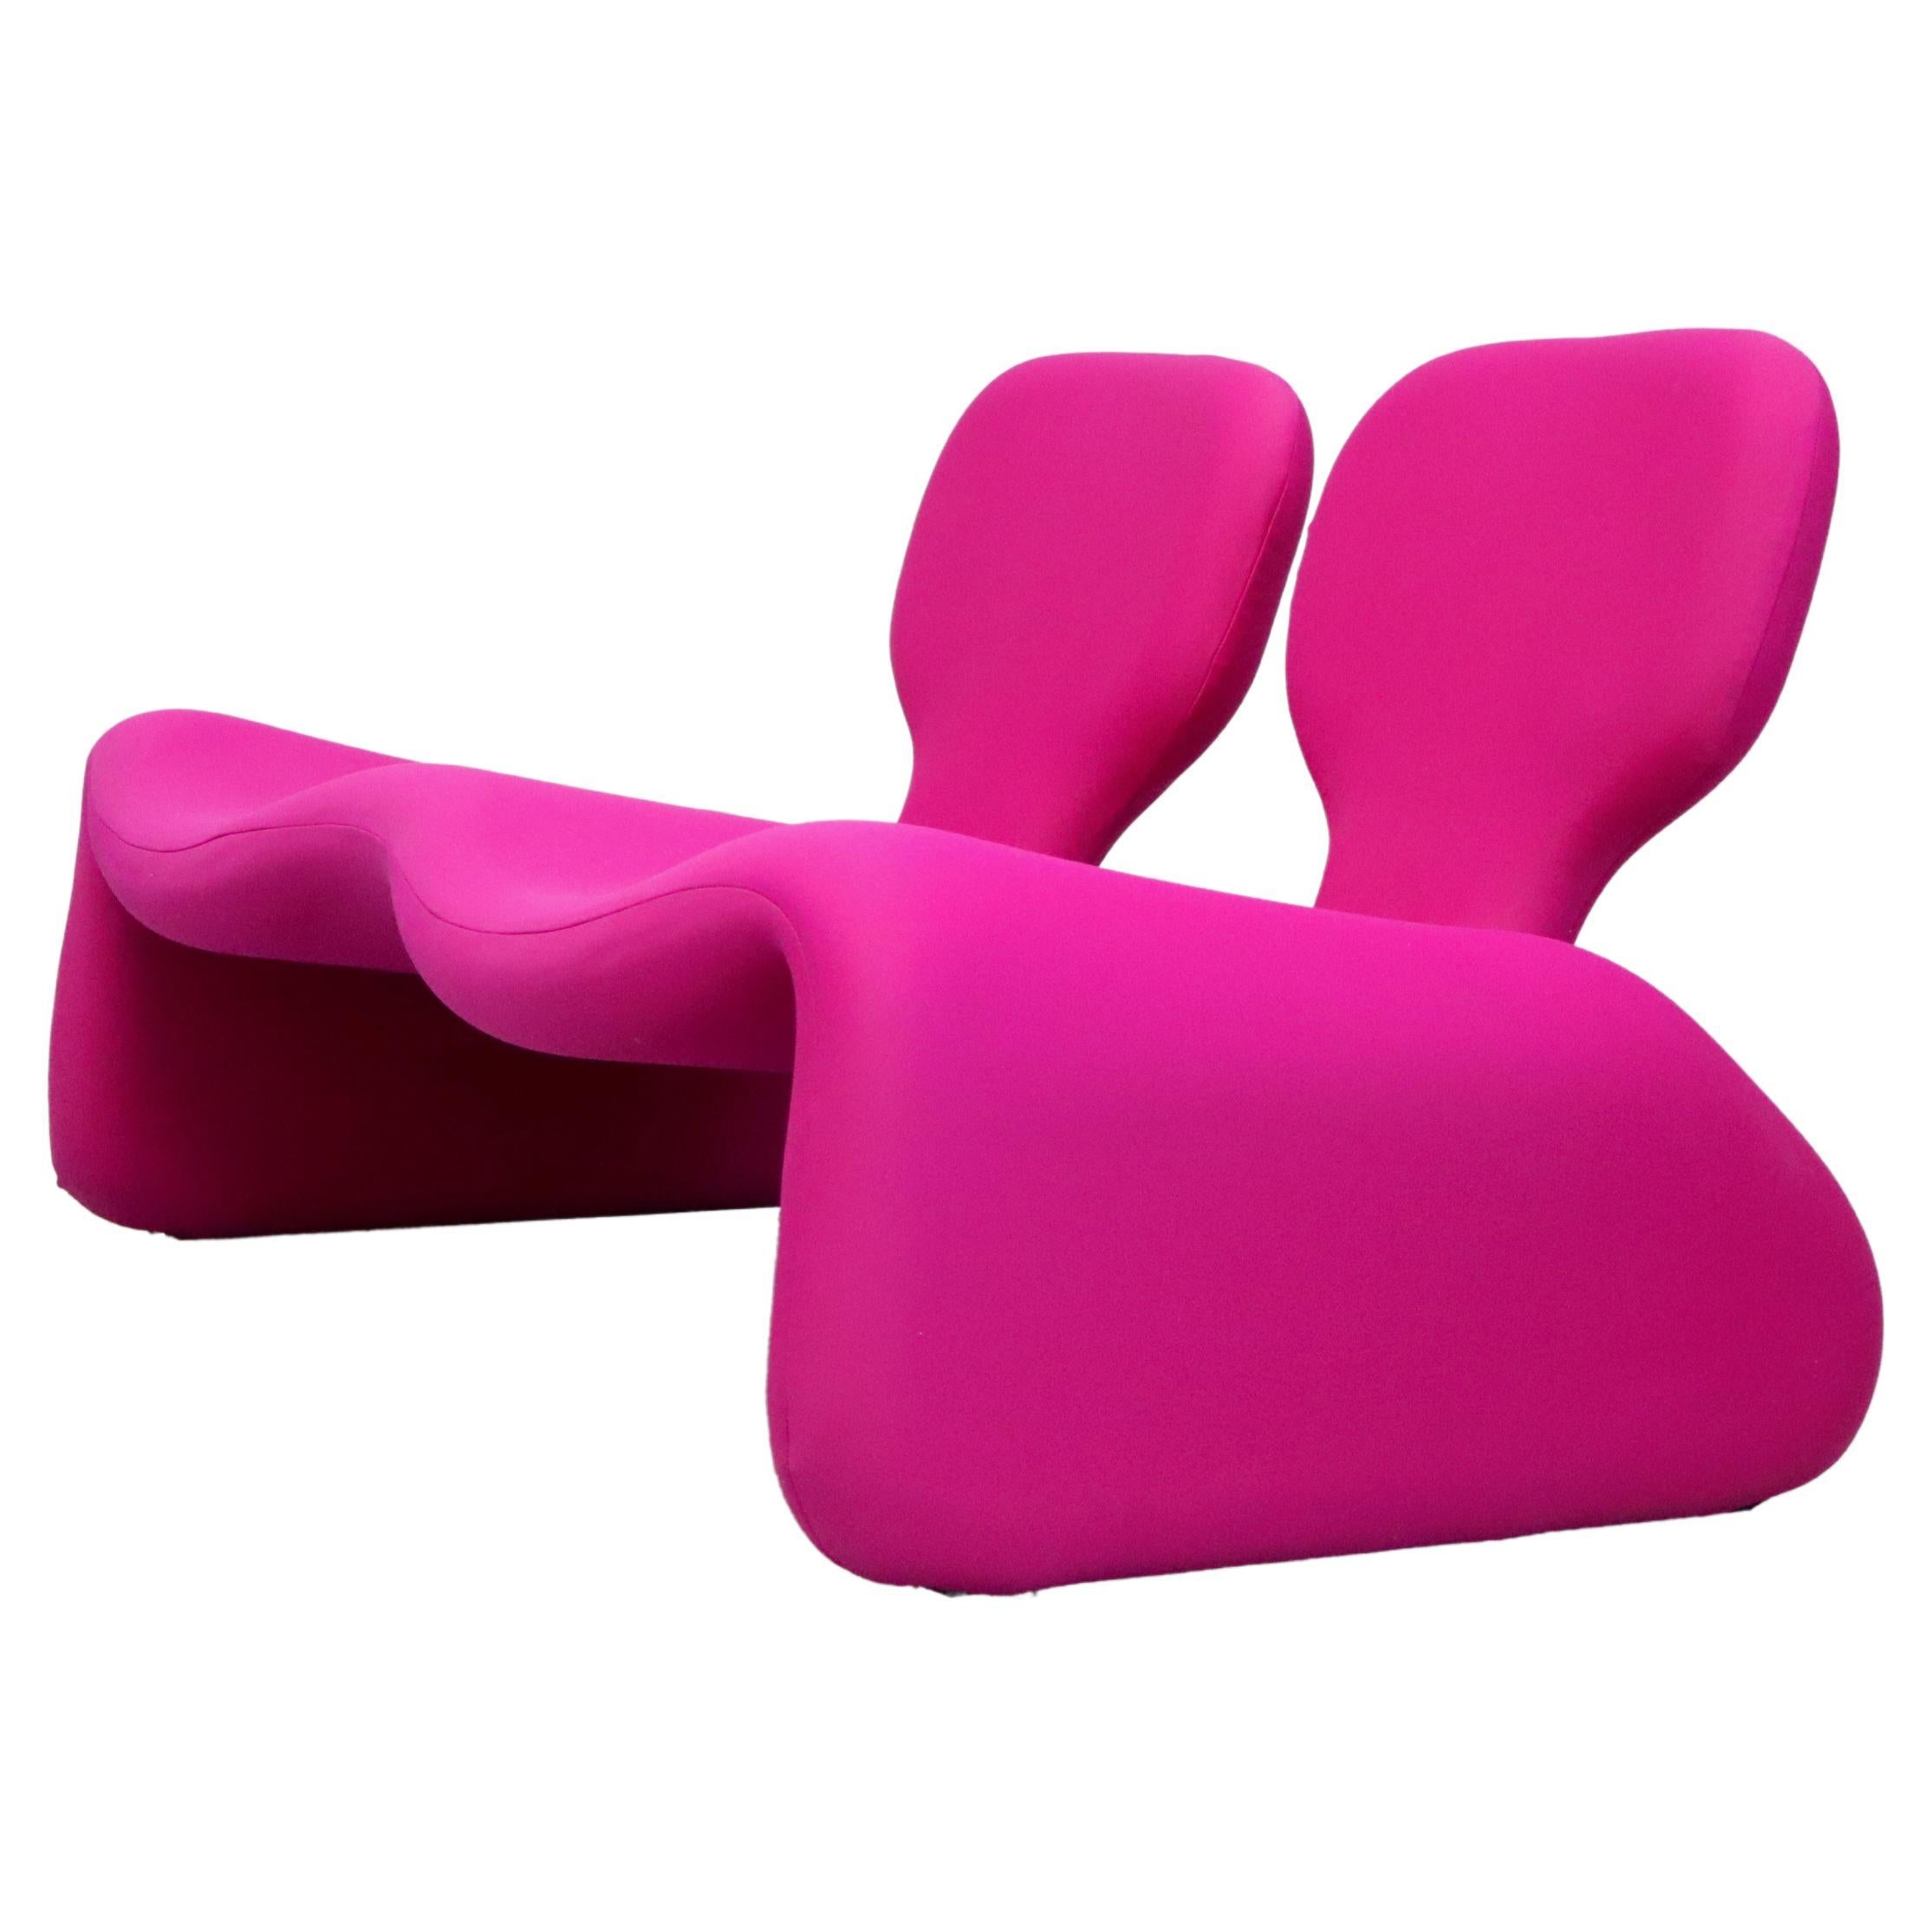 Two-Seat Djinn Sofa by Olivier Mourgue for Airborne For Sale